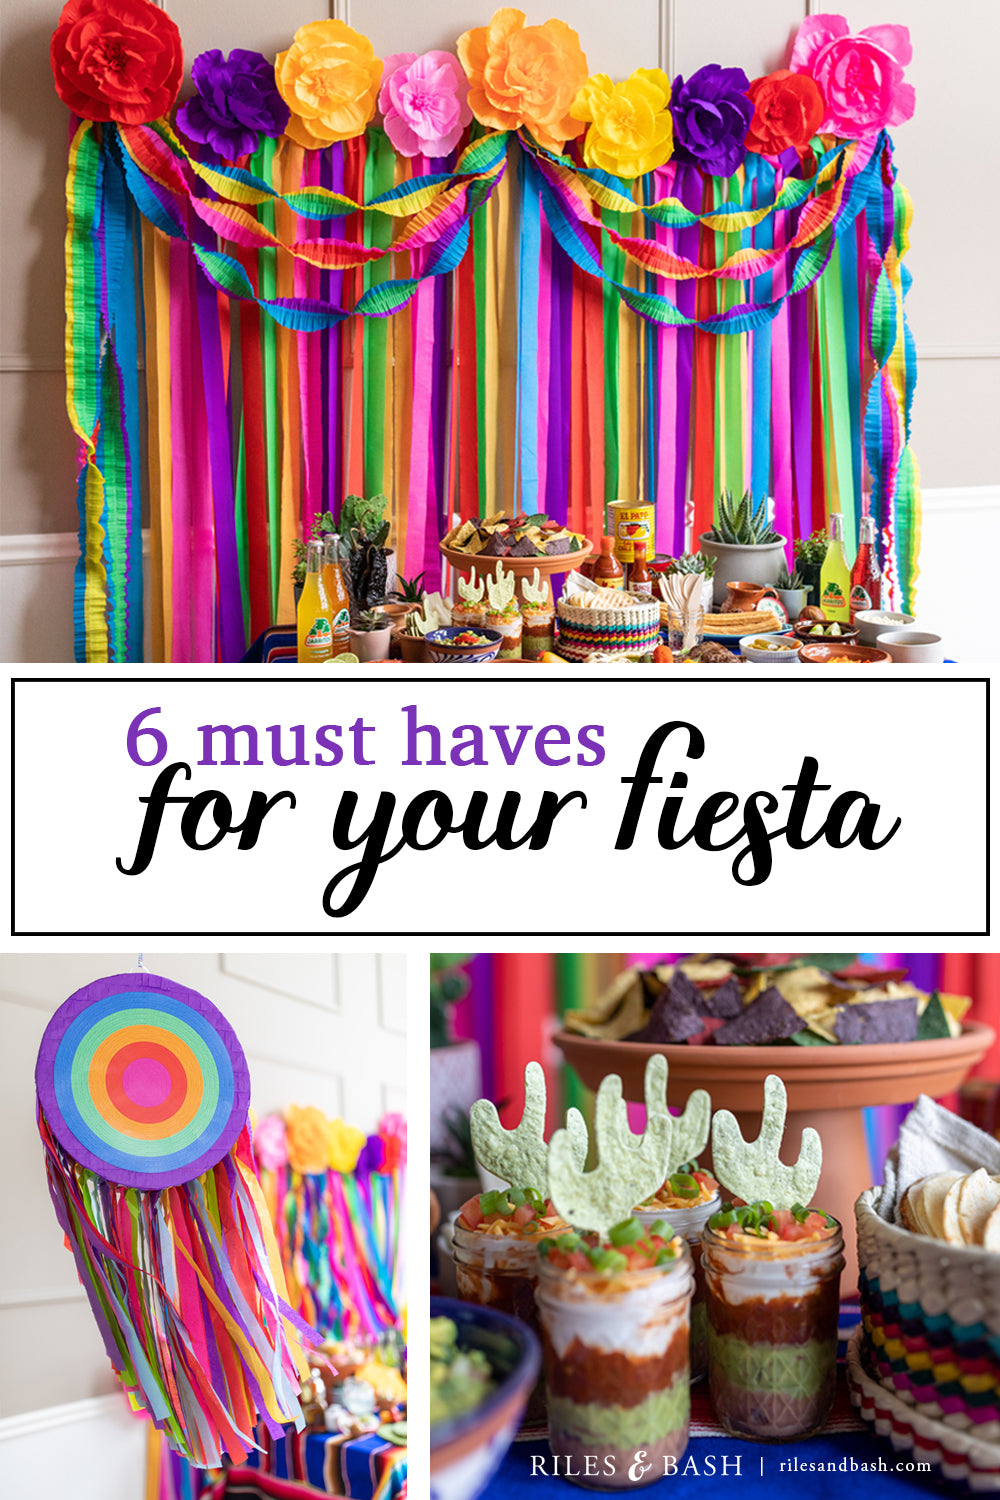 Riles & Bash_6 Must Haves for your Fiesta